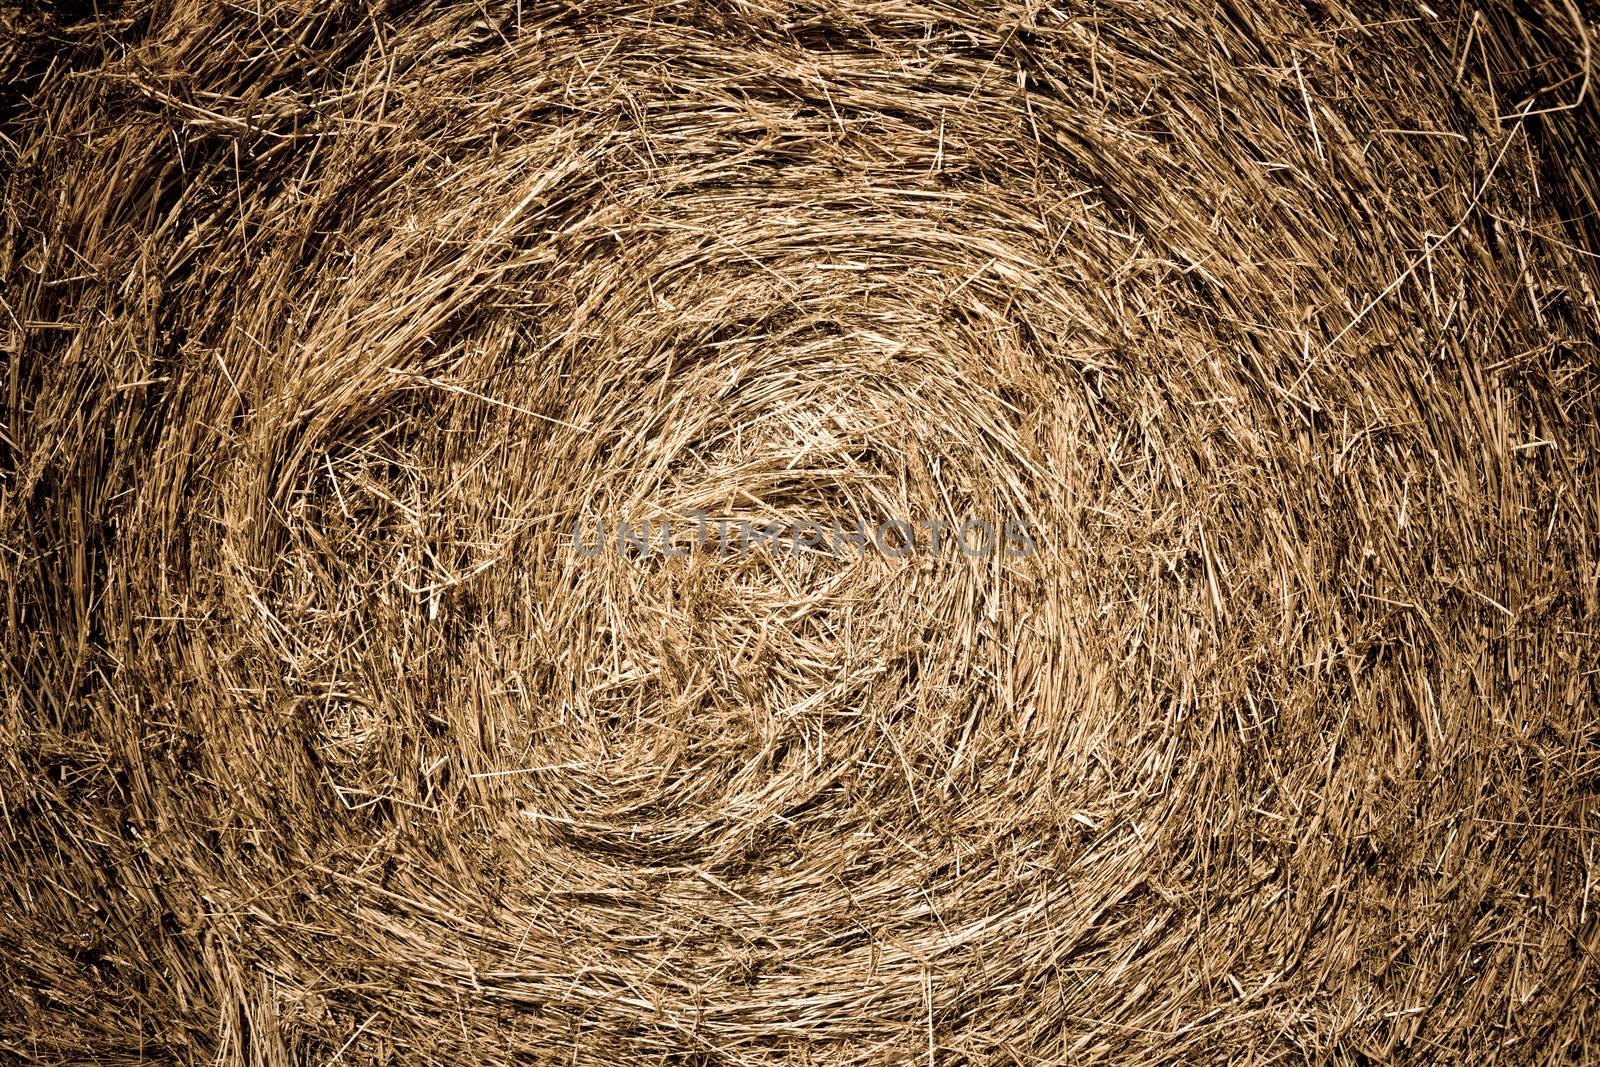 Round straw bale closeup detail made from cut and dried pasture grass baled to provide winter feed for livestock